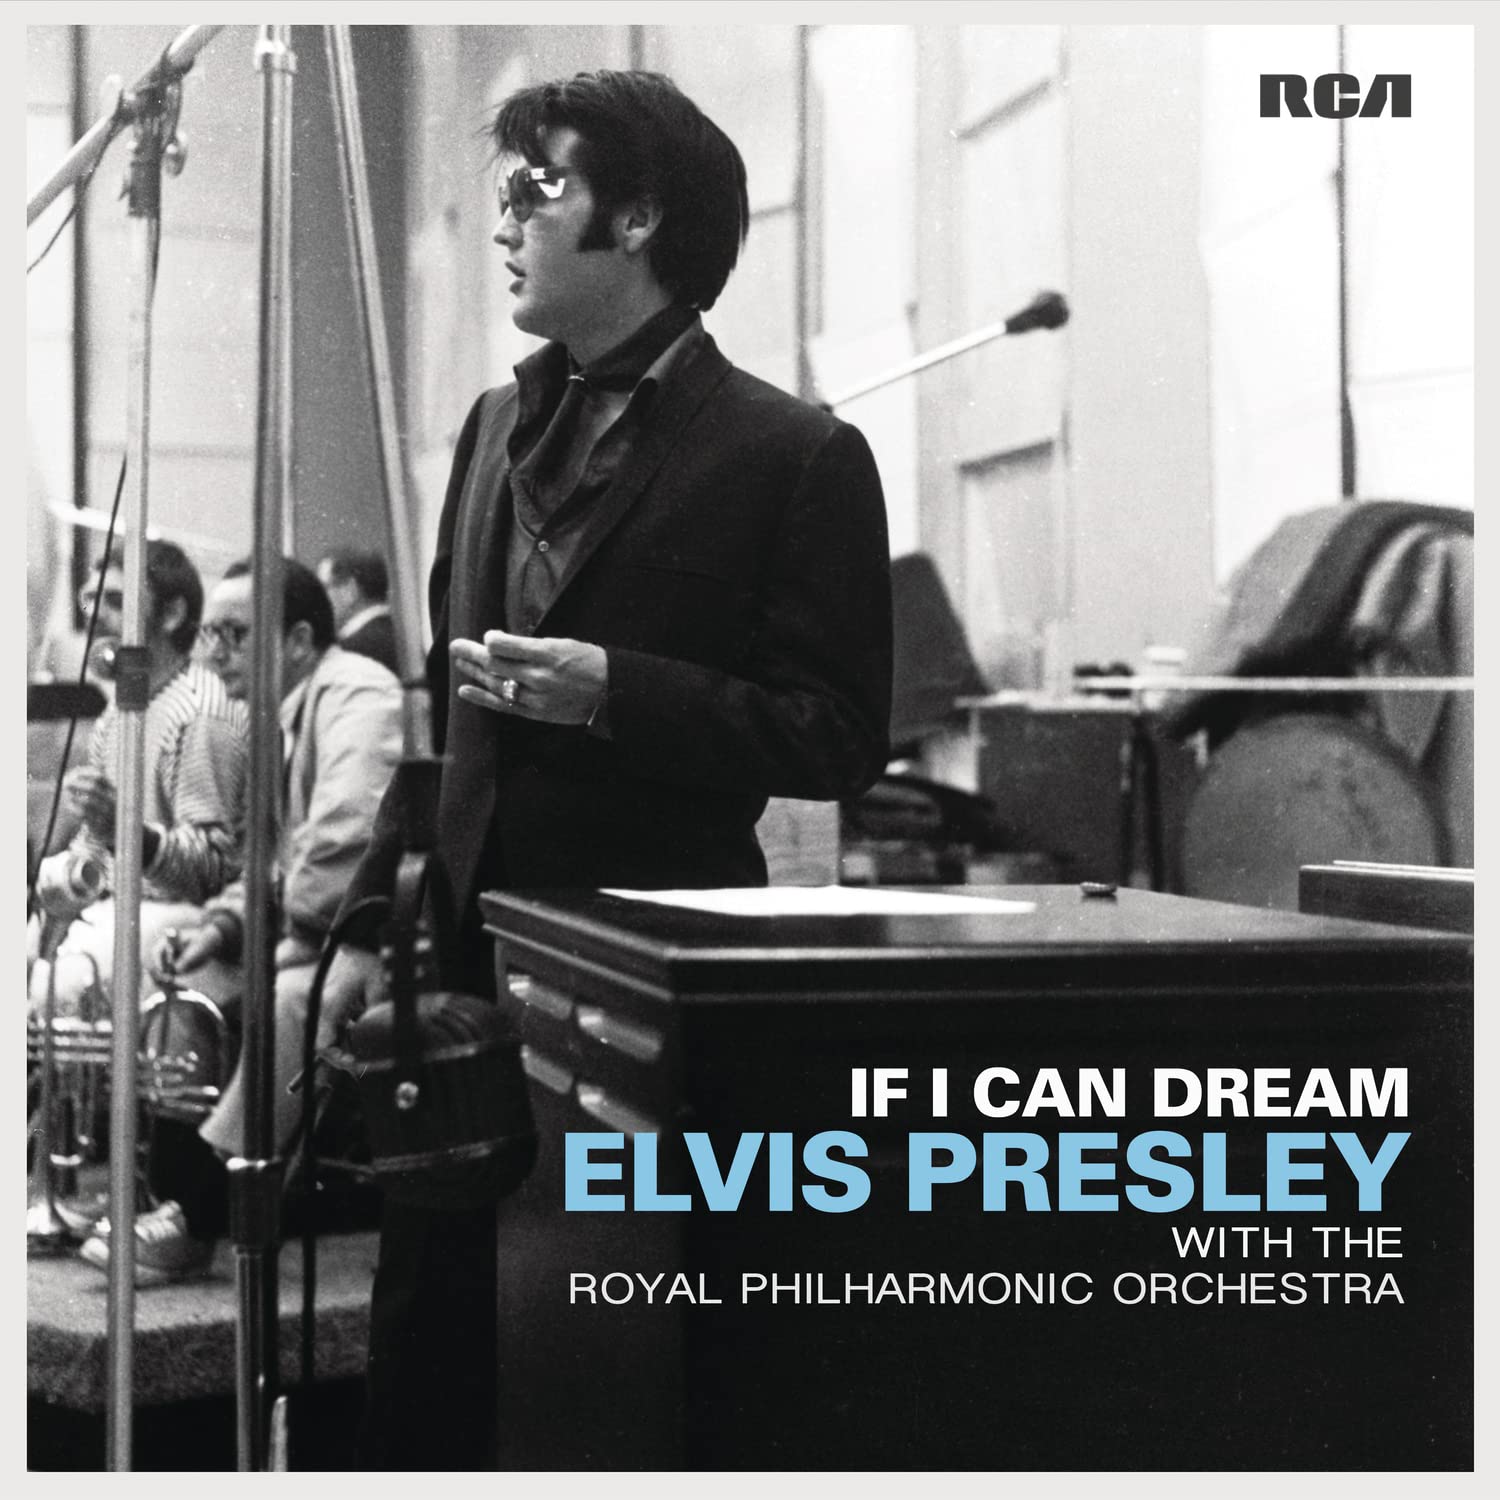 Elvis Presley If I Can Dream With The Royal Philharmonic Orchestra Vinyl LP